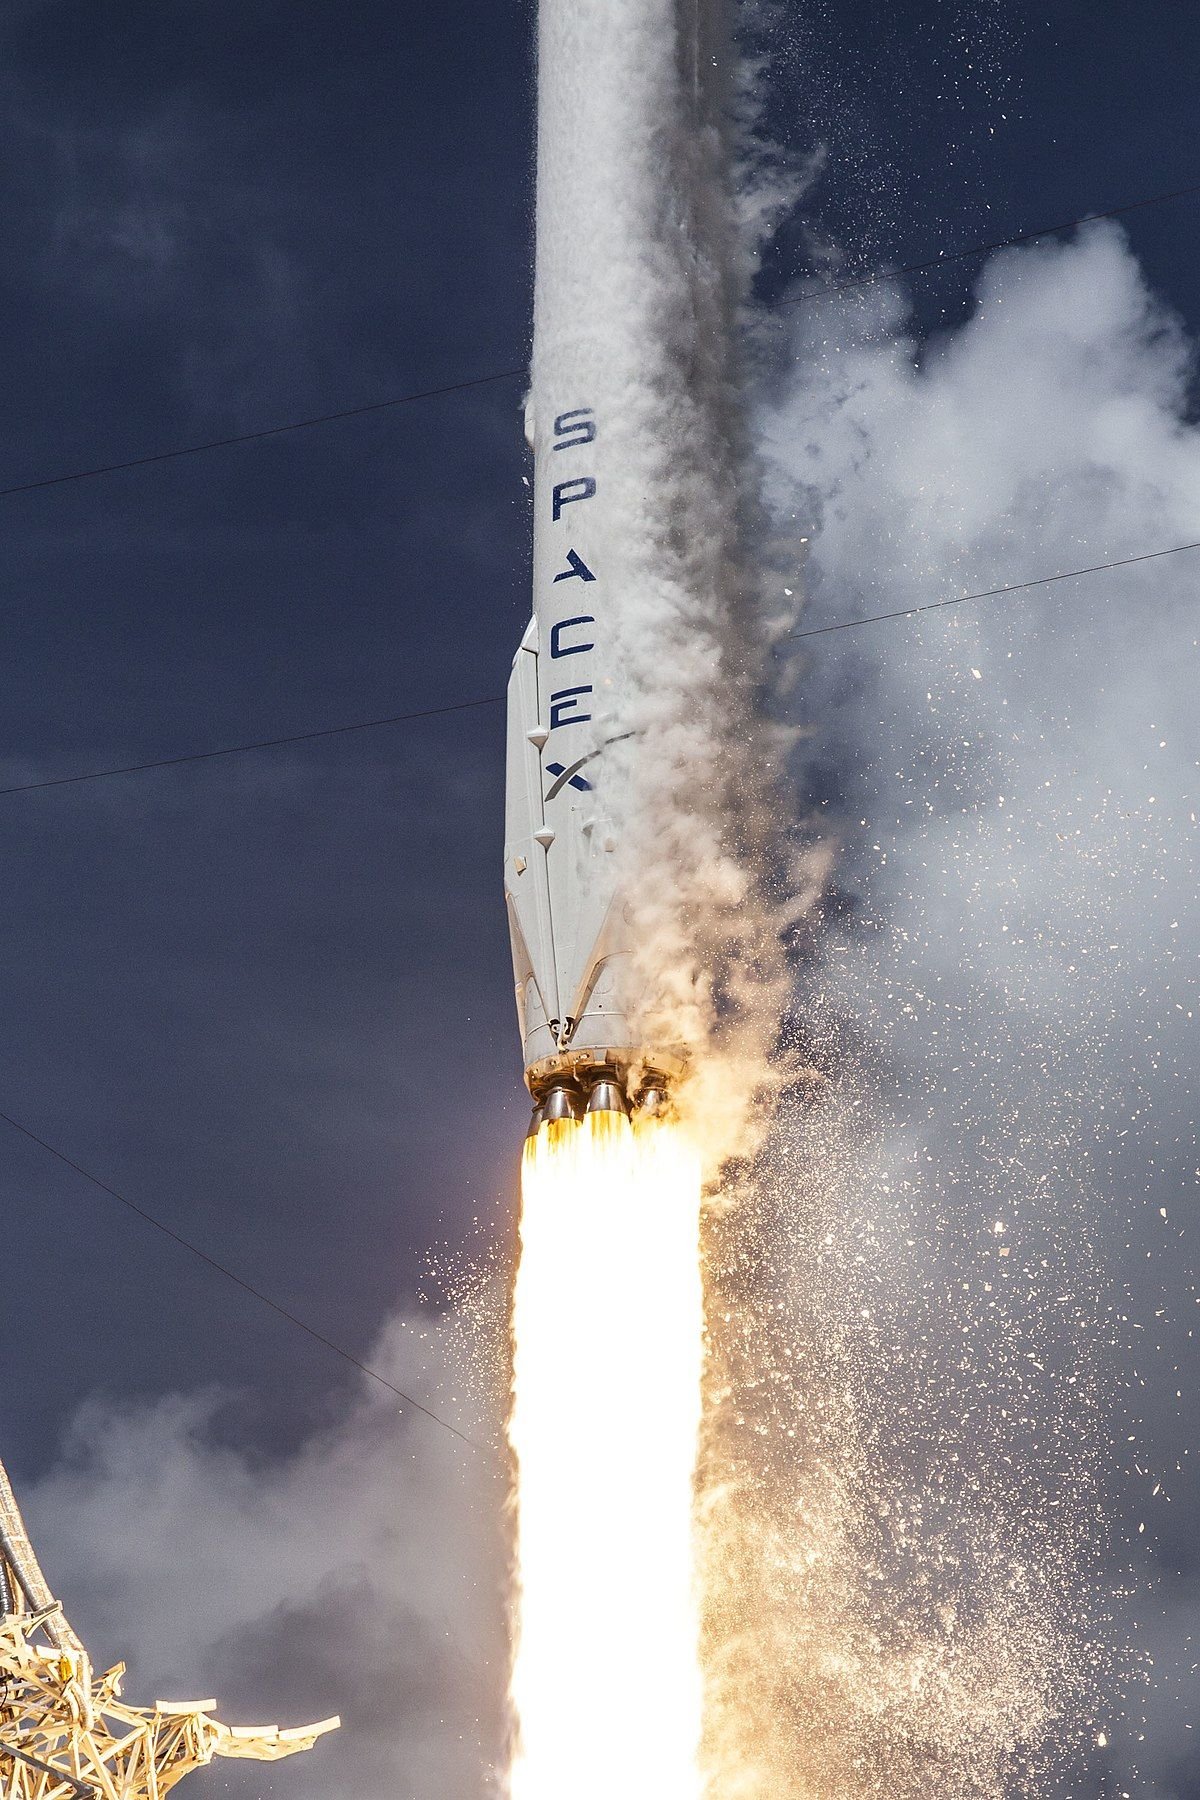 History of SpaceX